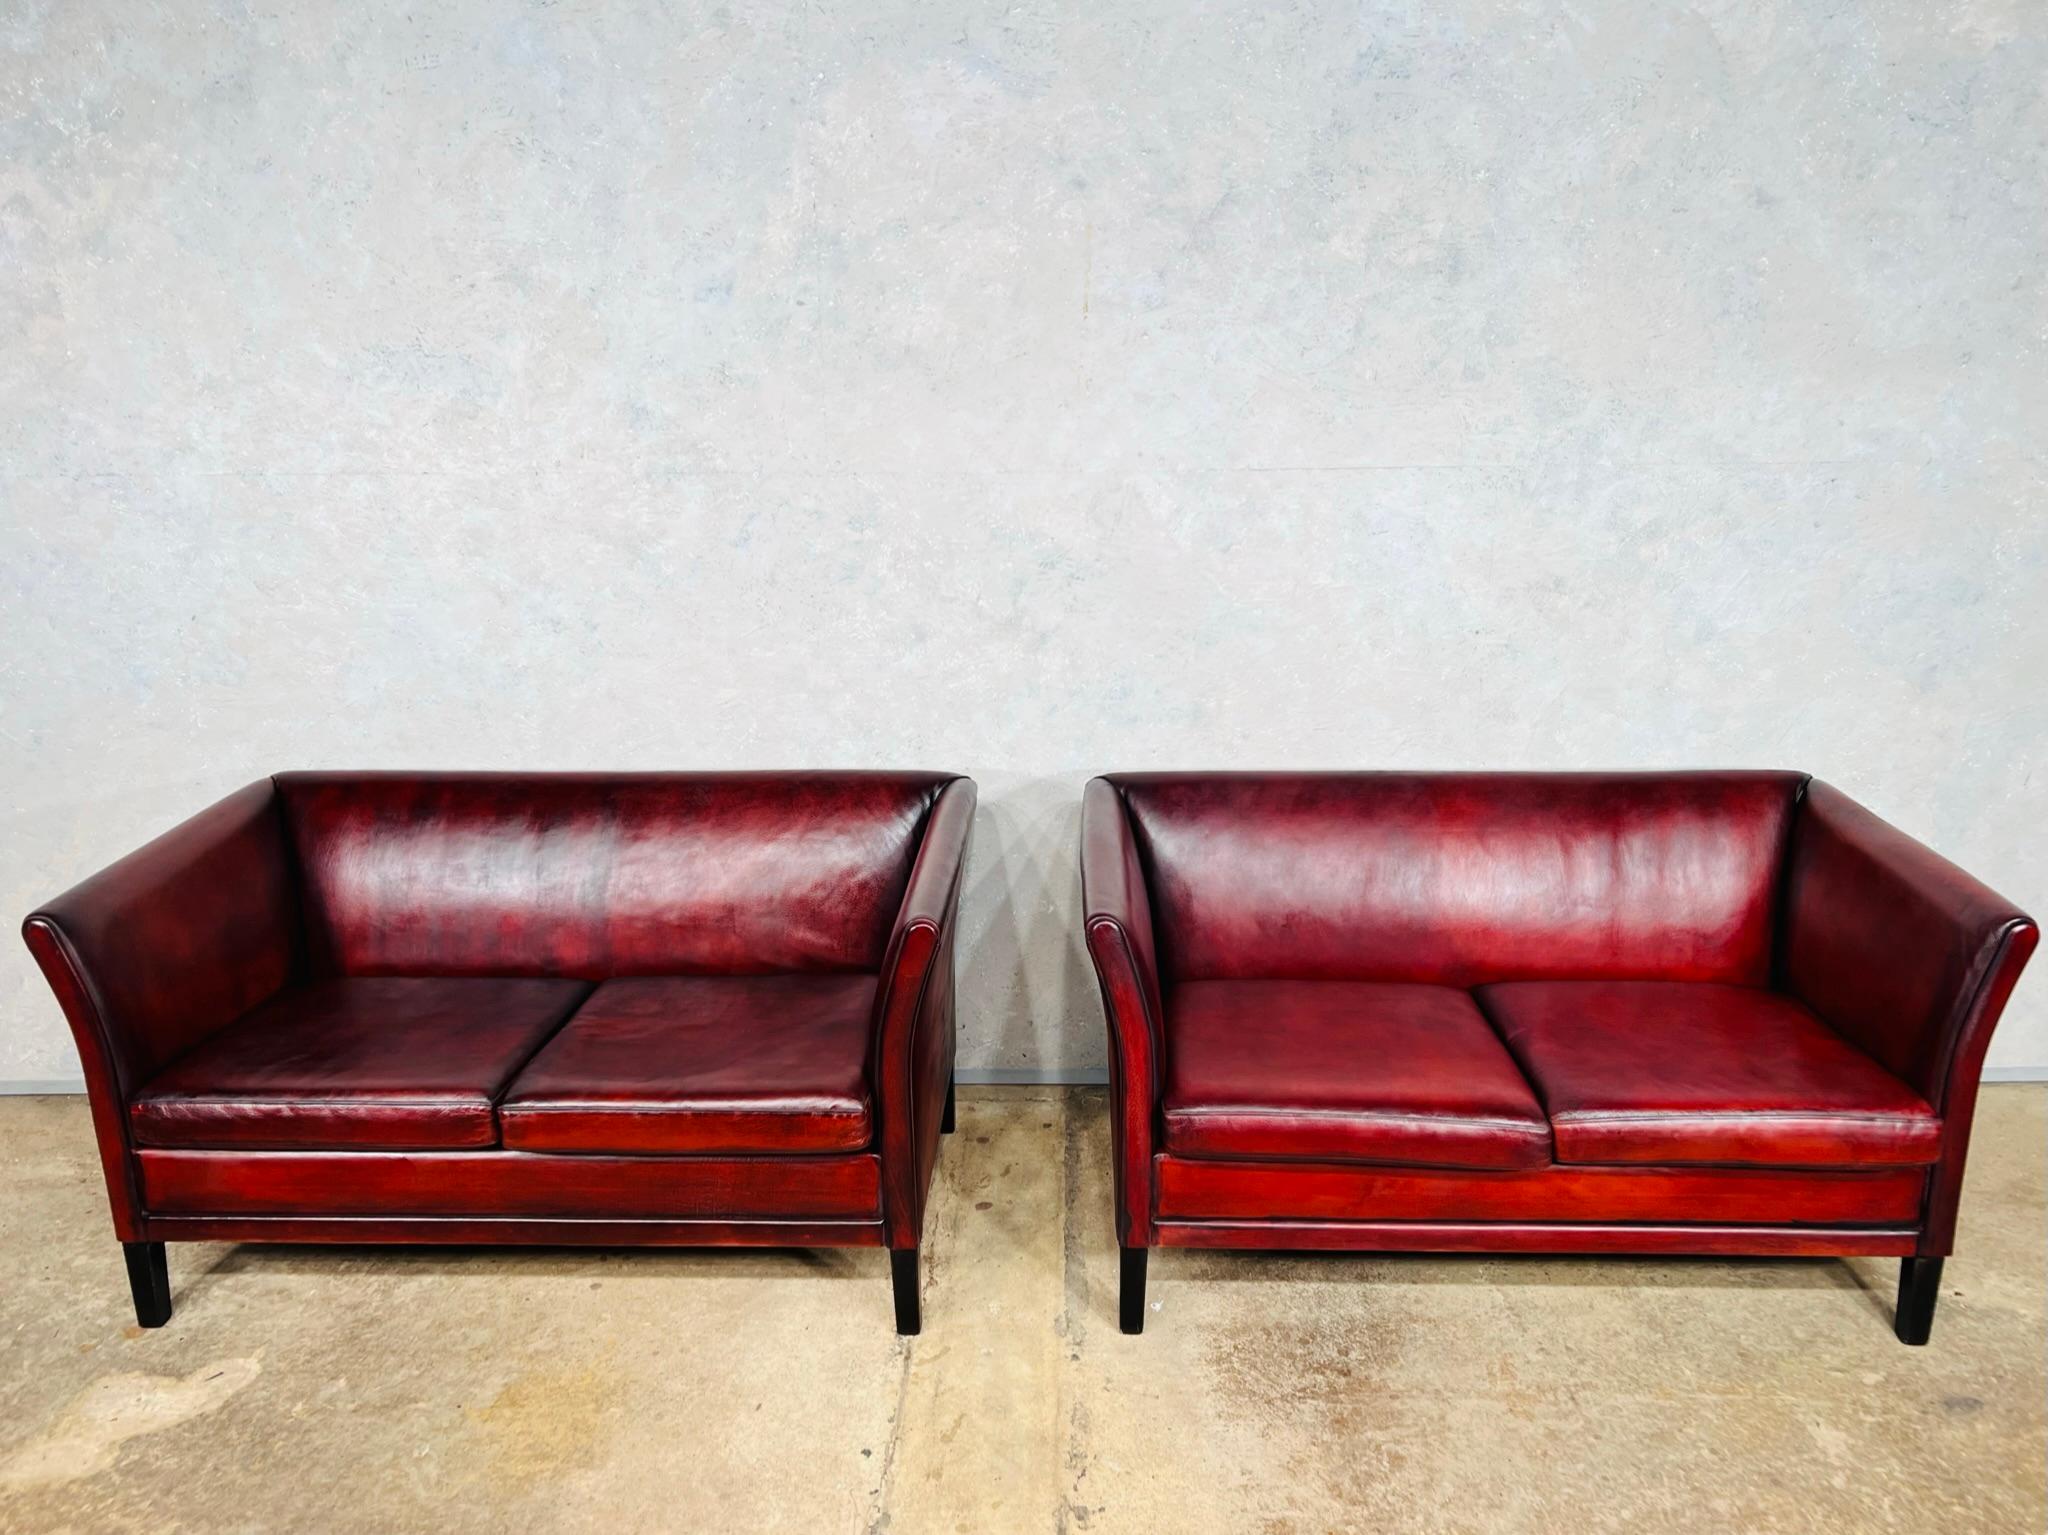 Pair of neat vintage danish 1970s patinated chestnut red 2 seat leather sofas
Stunning hand dyed patinated deep chestnut red colour with great patina and finish.

Viewings welcome at our showroom in Lewes, East Sussex.

Delivery to mainland UK